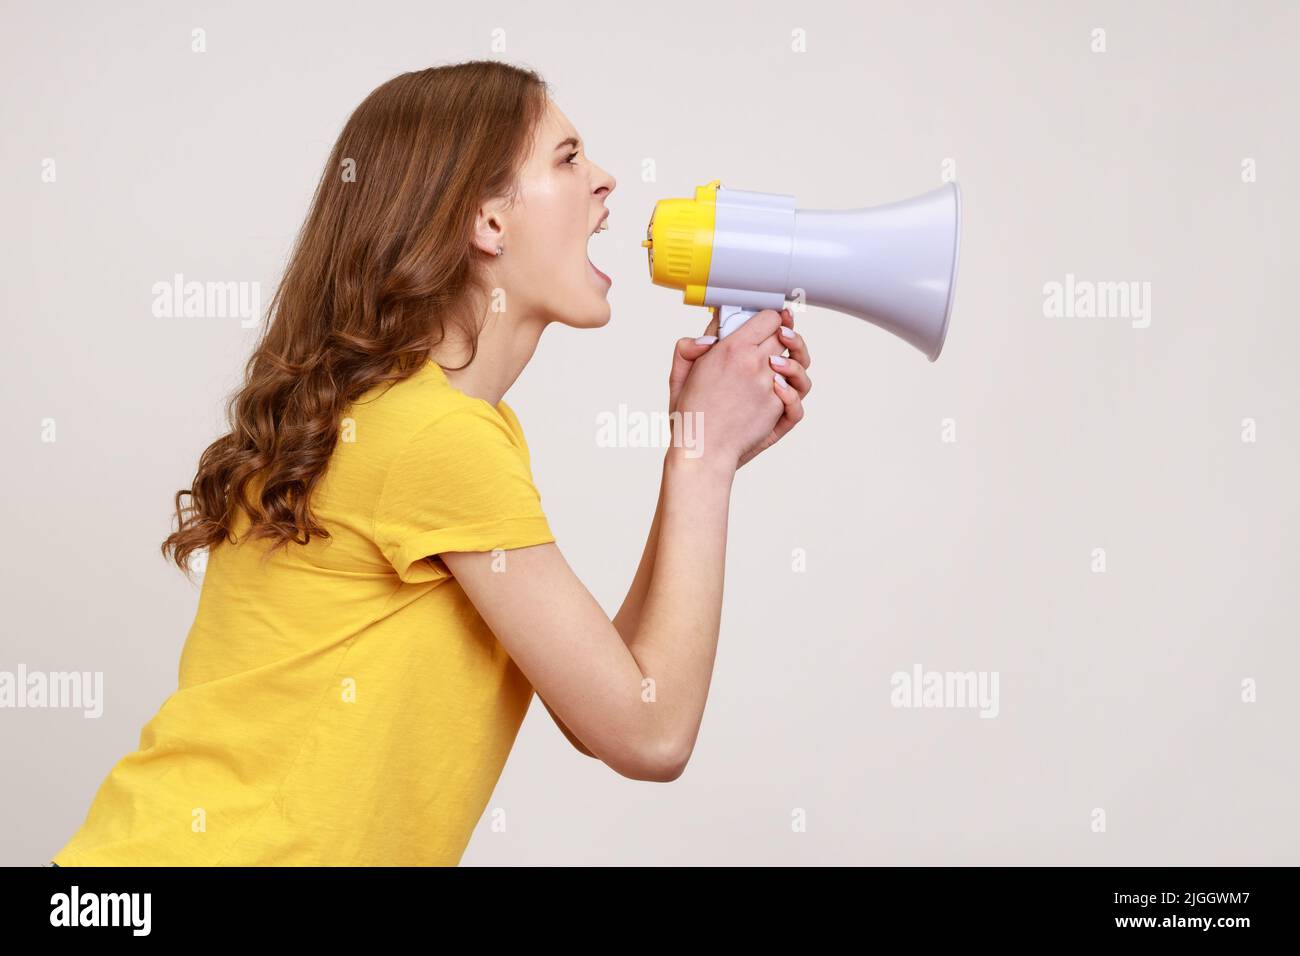 Profile portrait nervous brown haired female of young age in yellow t-shirt loudly speaking screaming holding megaphone, announcing important message. Indoor studio shot isolated on gray background. Stock Photo